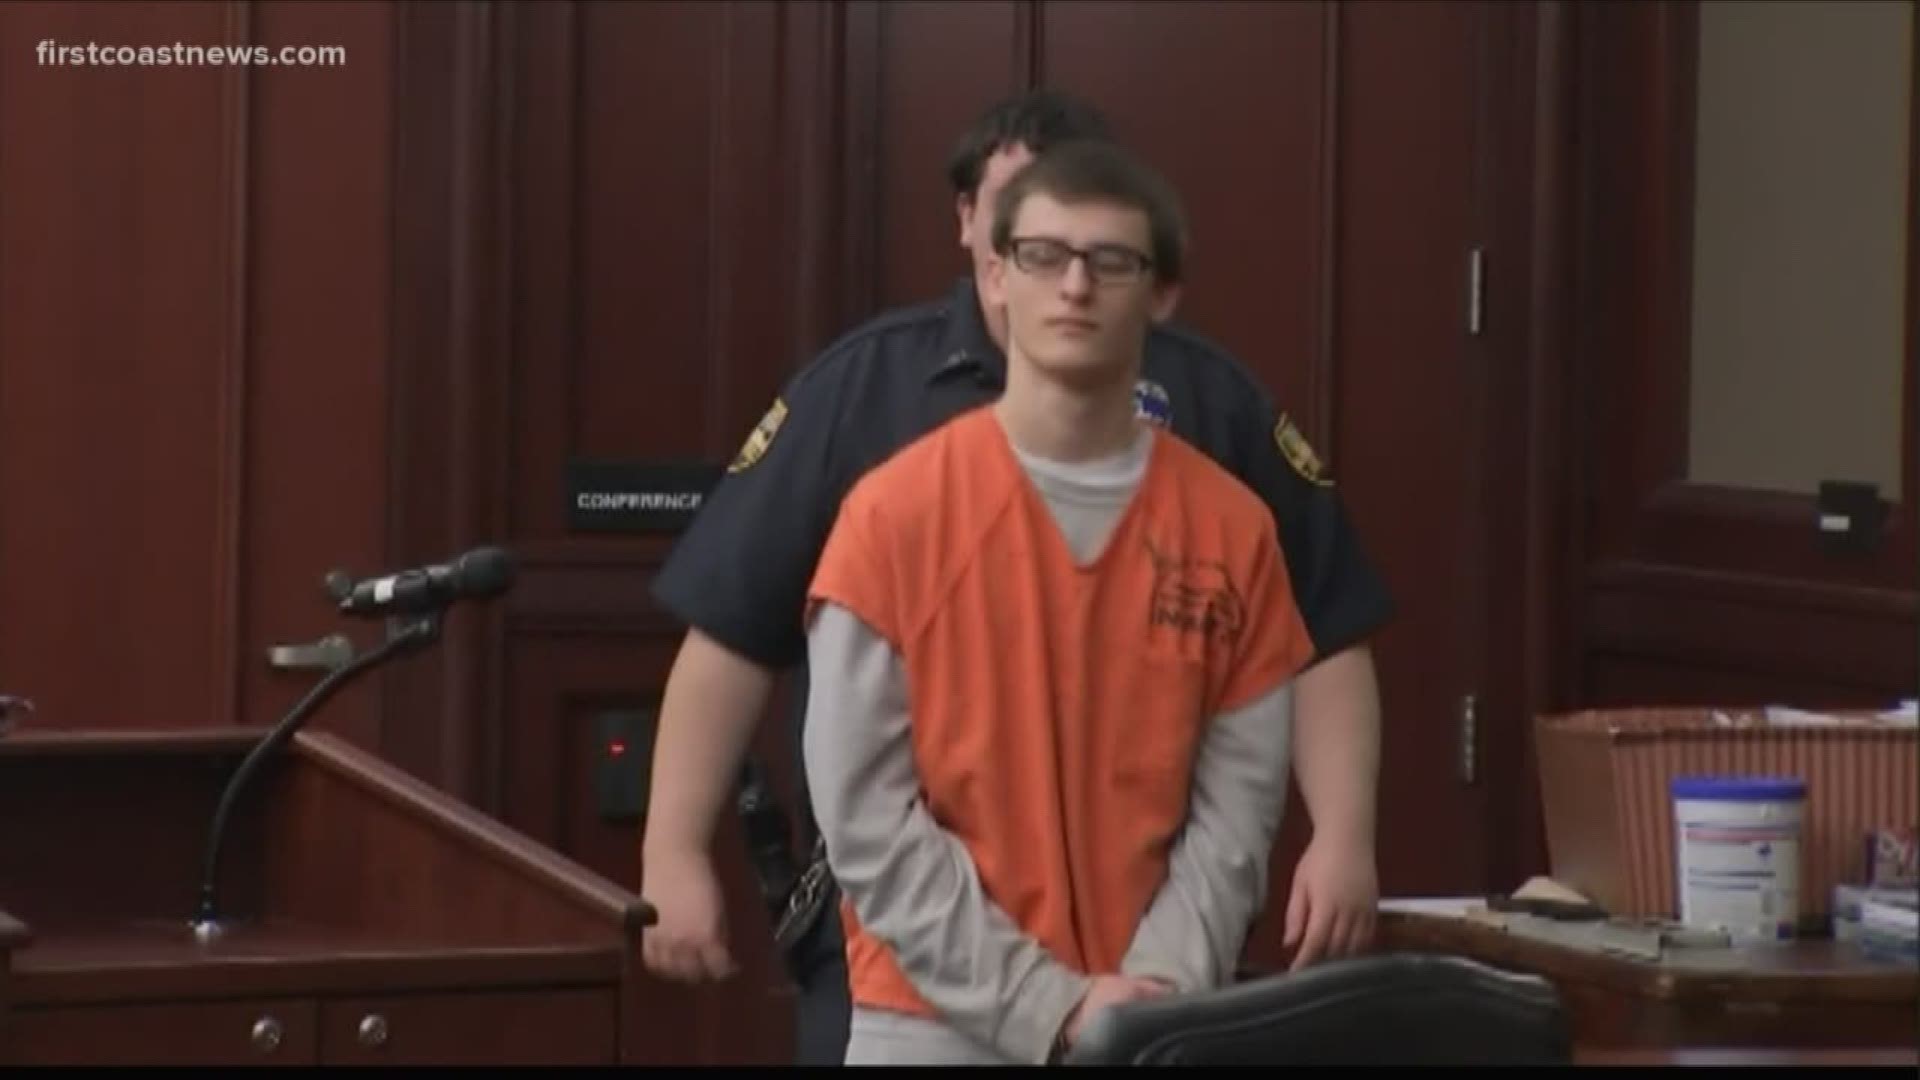 In a halting and tearful voice, Logan Mott apologized for fatally shooting and stabbing his grandmother, Kristina French, in November of 2017.